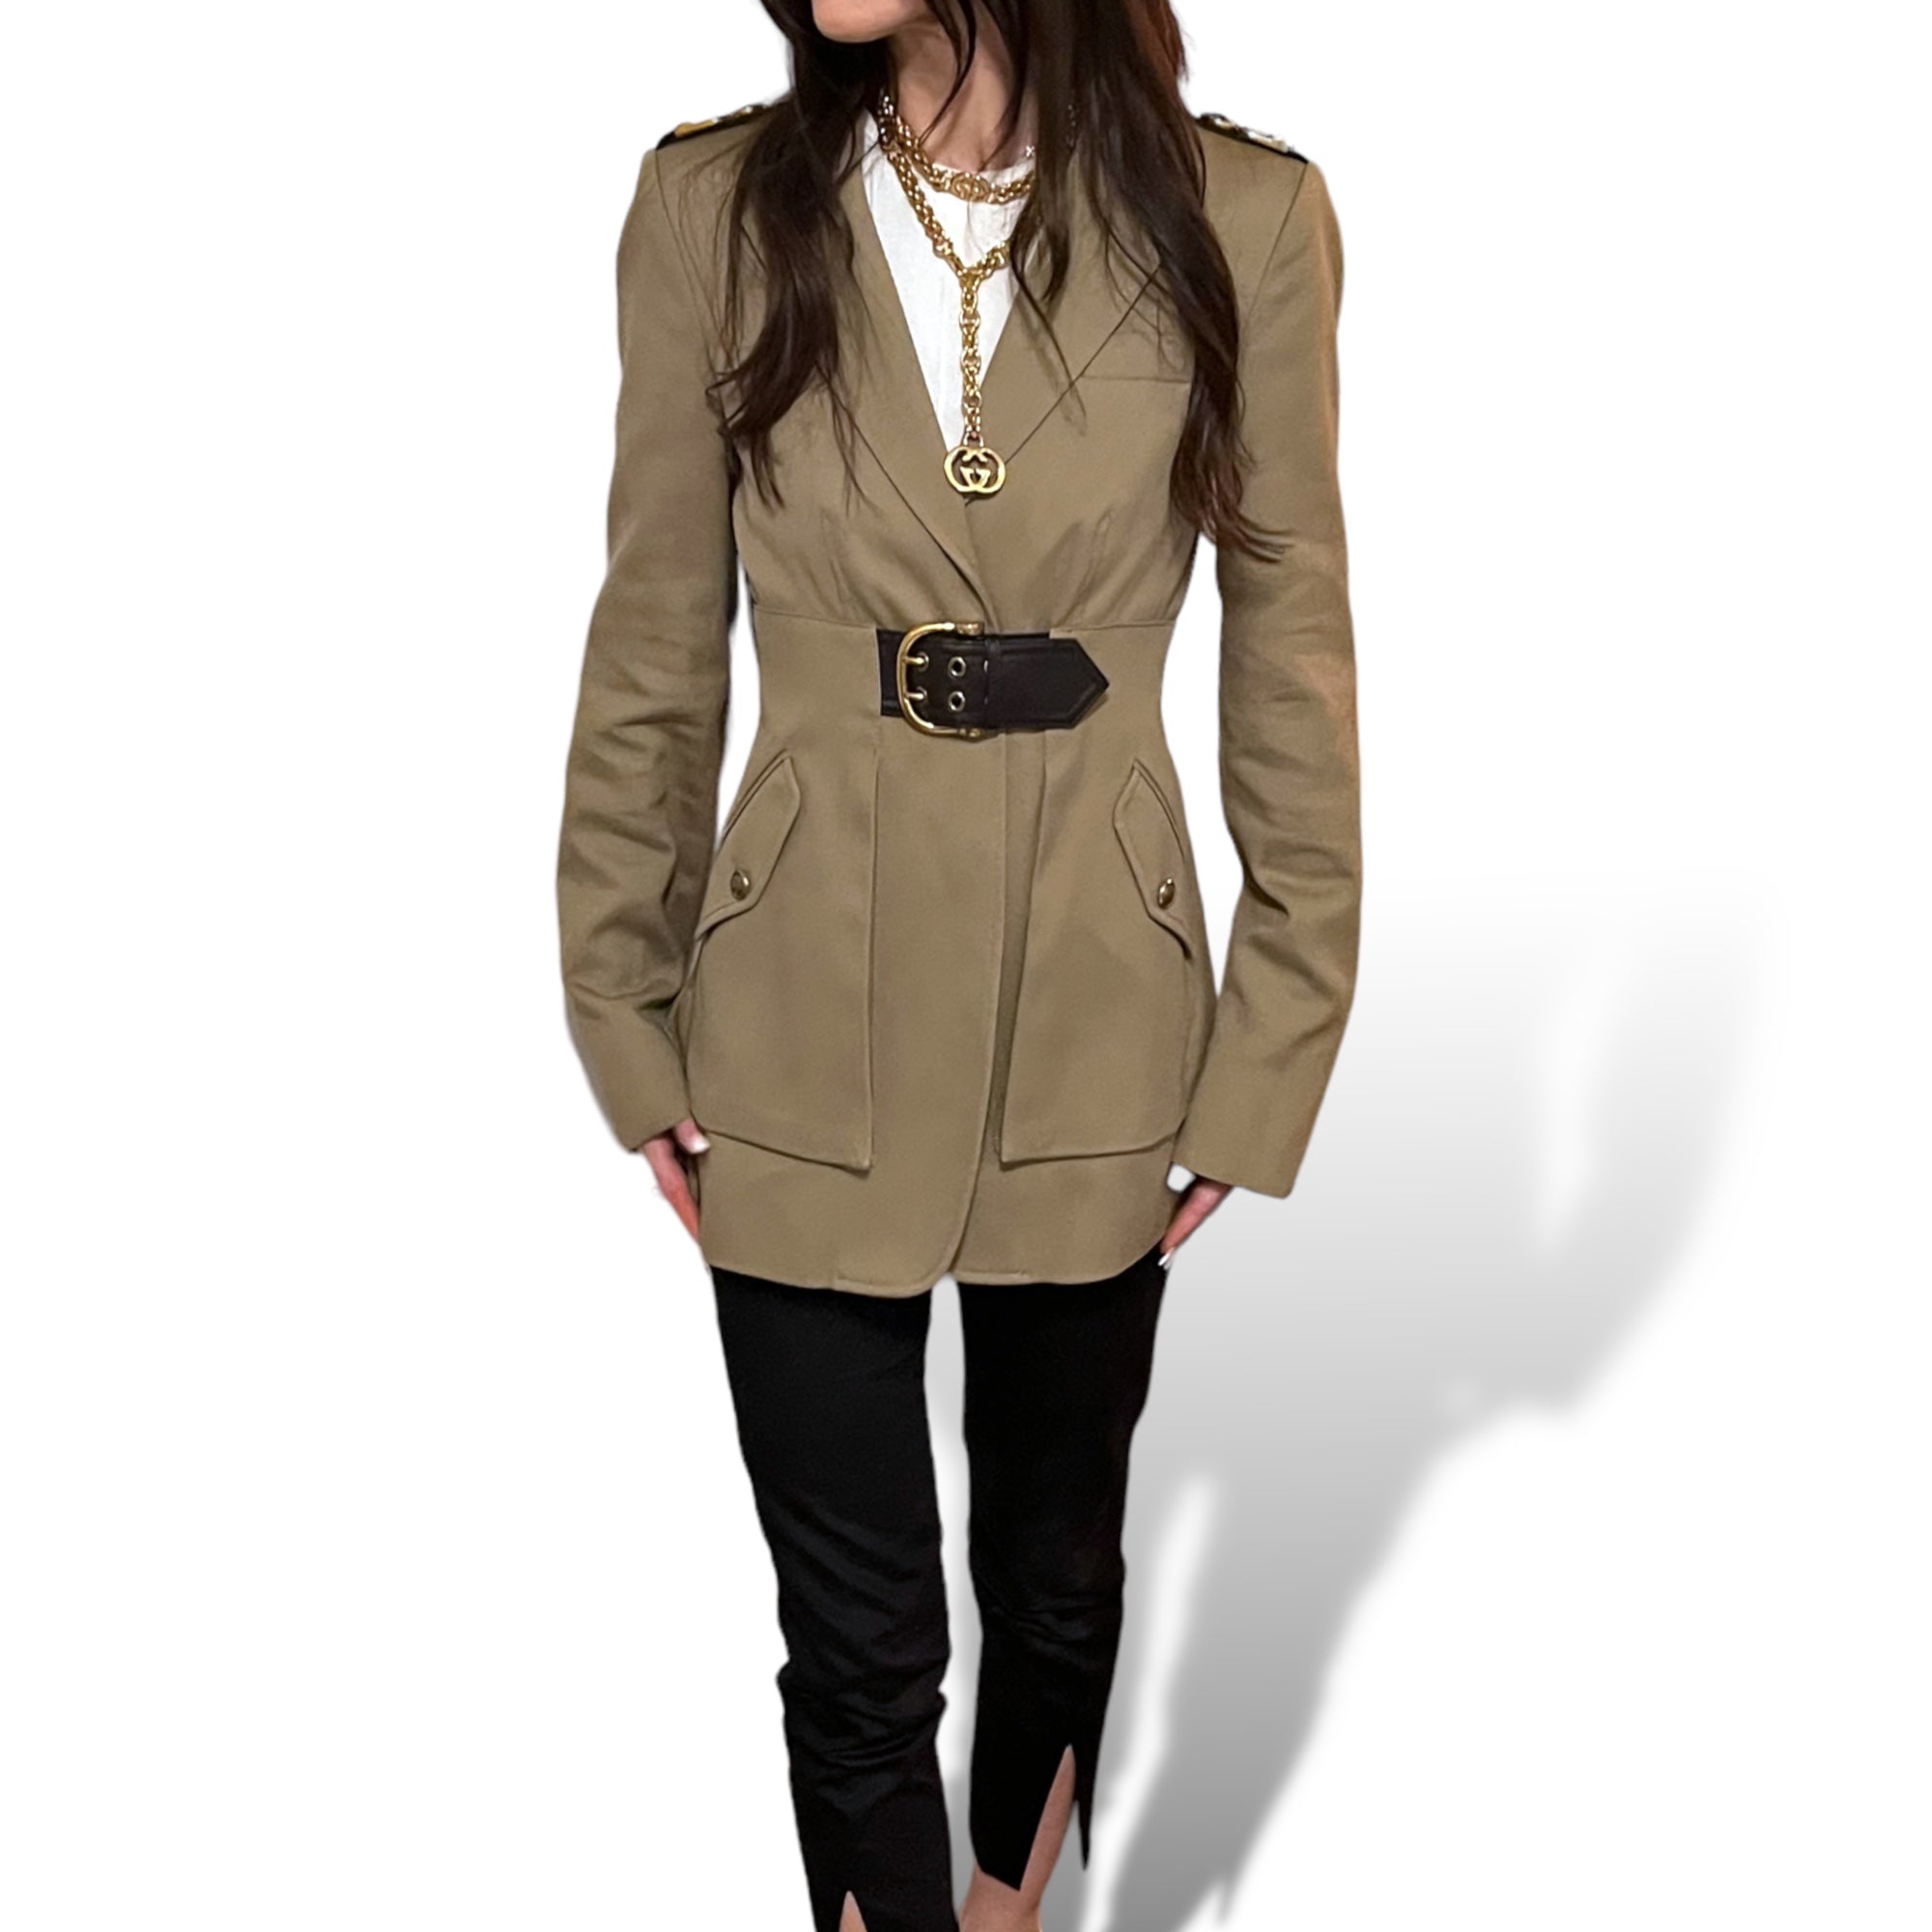 GUCCI Military Inspired Beige Canvas Jacket with Horse-bit Motif Accents |Size: 42|